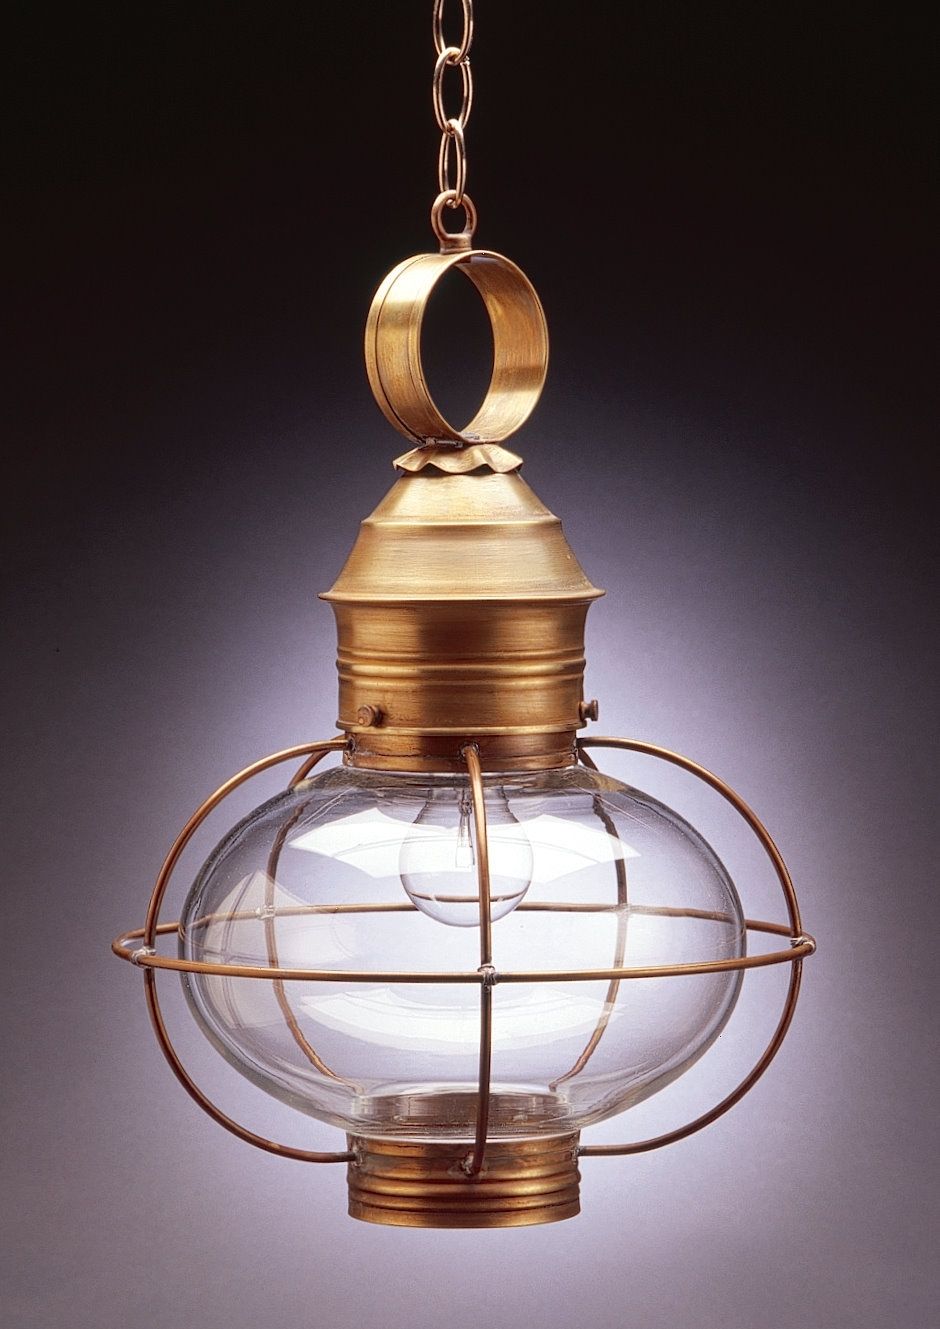 The Round & Onion Hanging Lantern — Electric Lantern | The Northeast With Hanging Outdoor Onion Lights (View 12 of 15)